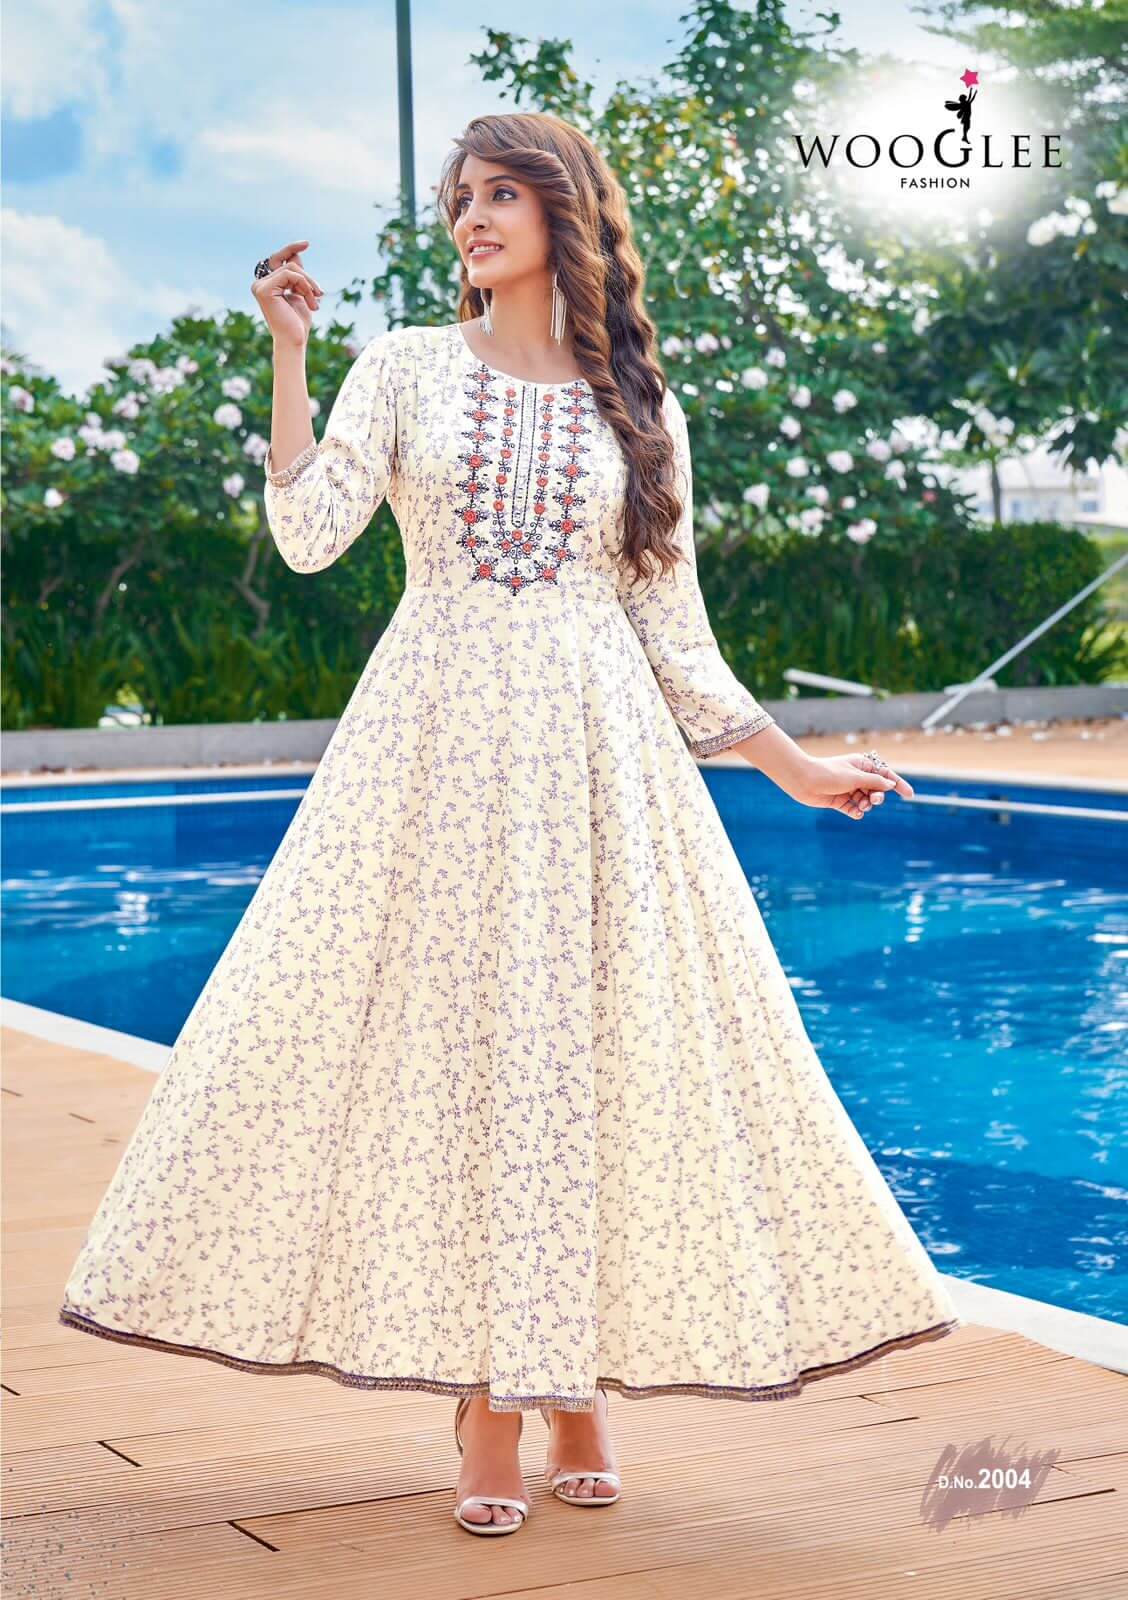 Wooglee Fashion Avsar Gowns Catalog collection 5